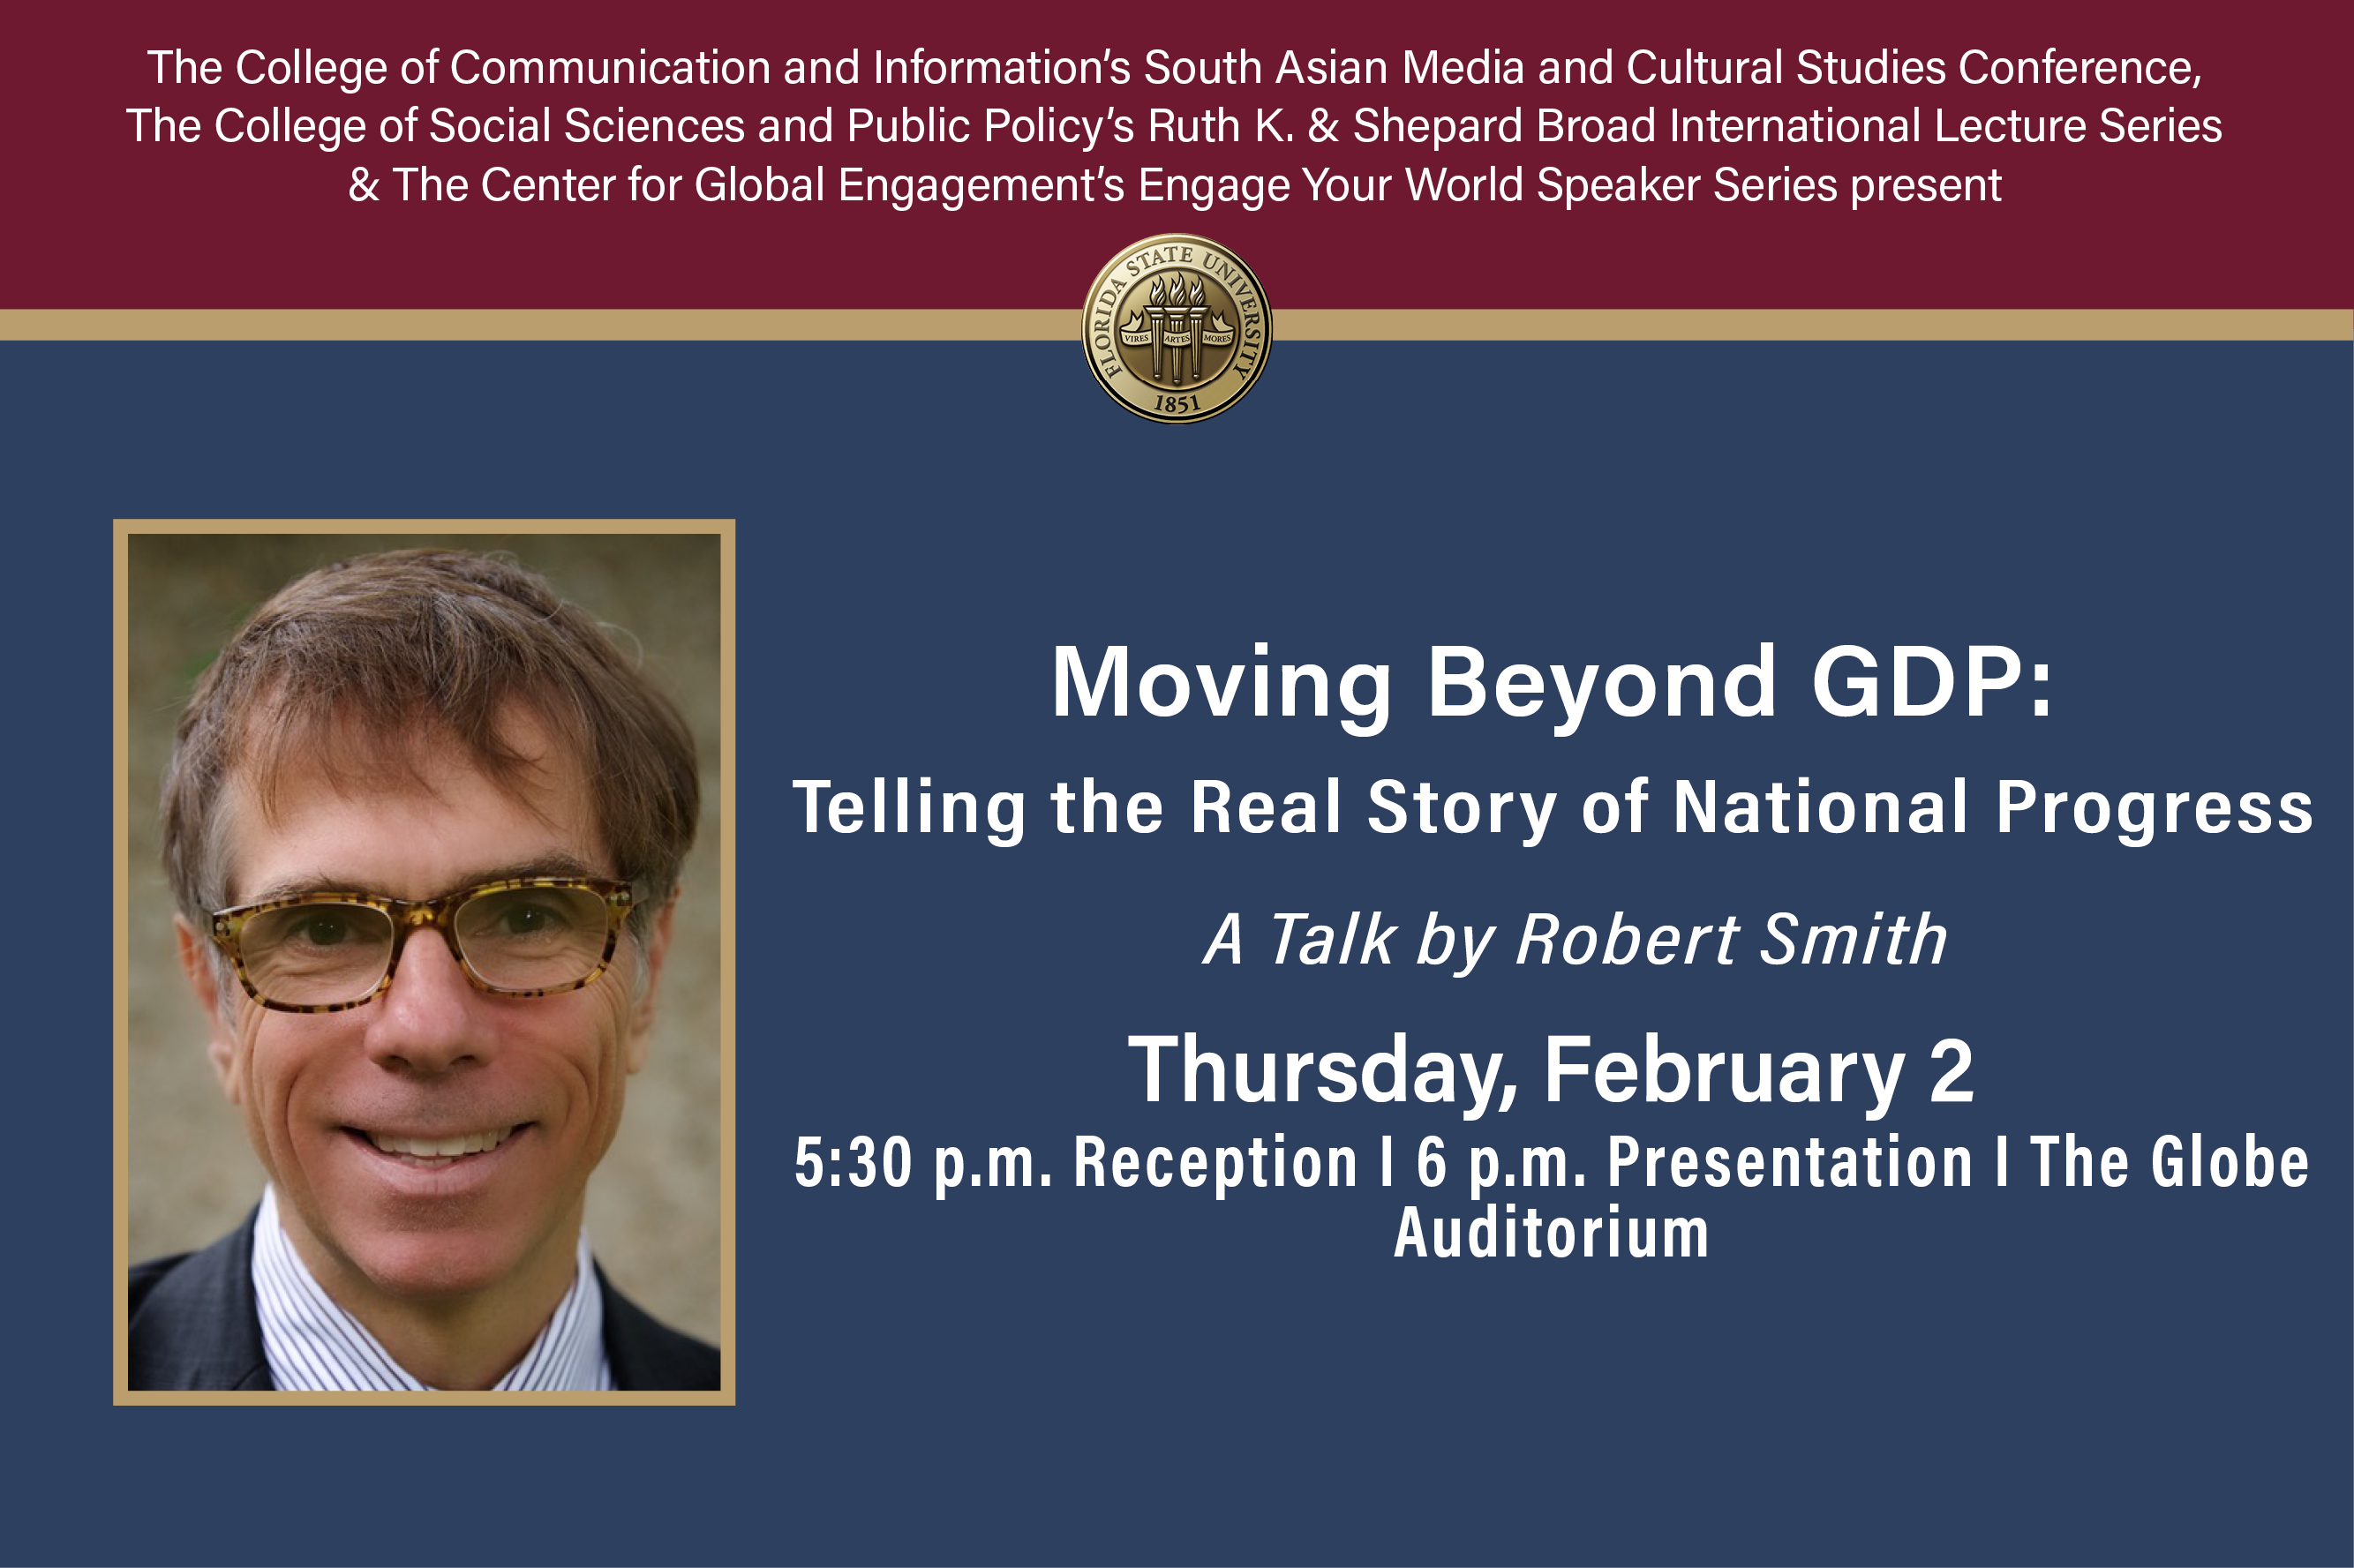 Engage Your World: Moving Beyond GDP: Telling the Real Story of National Progress - A Talk by Robert Smith